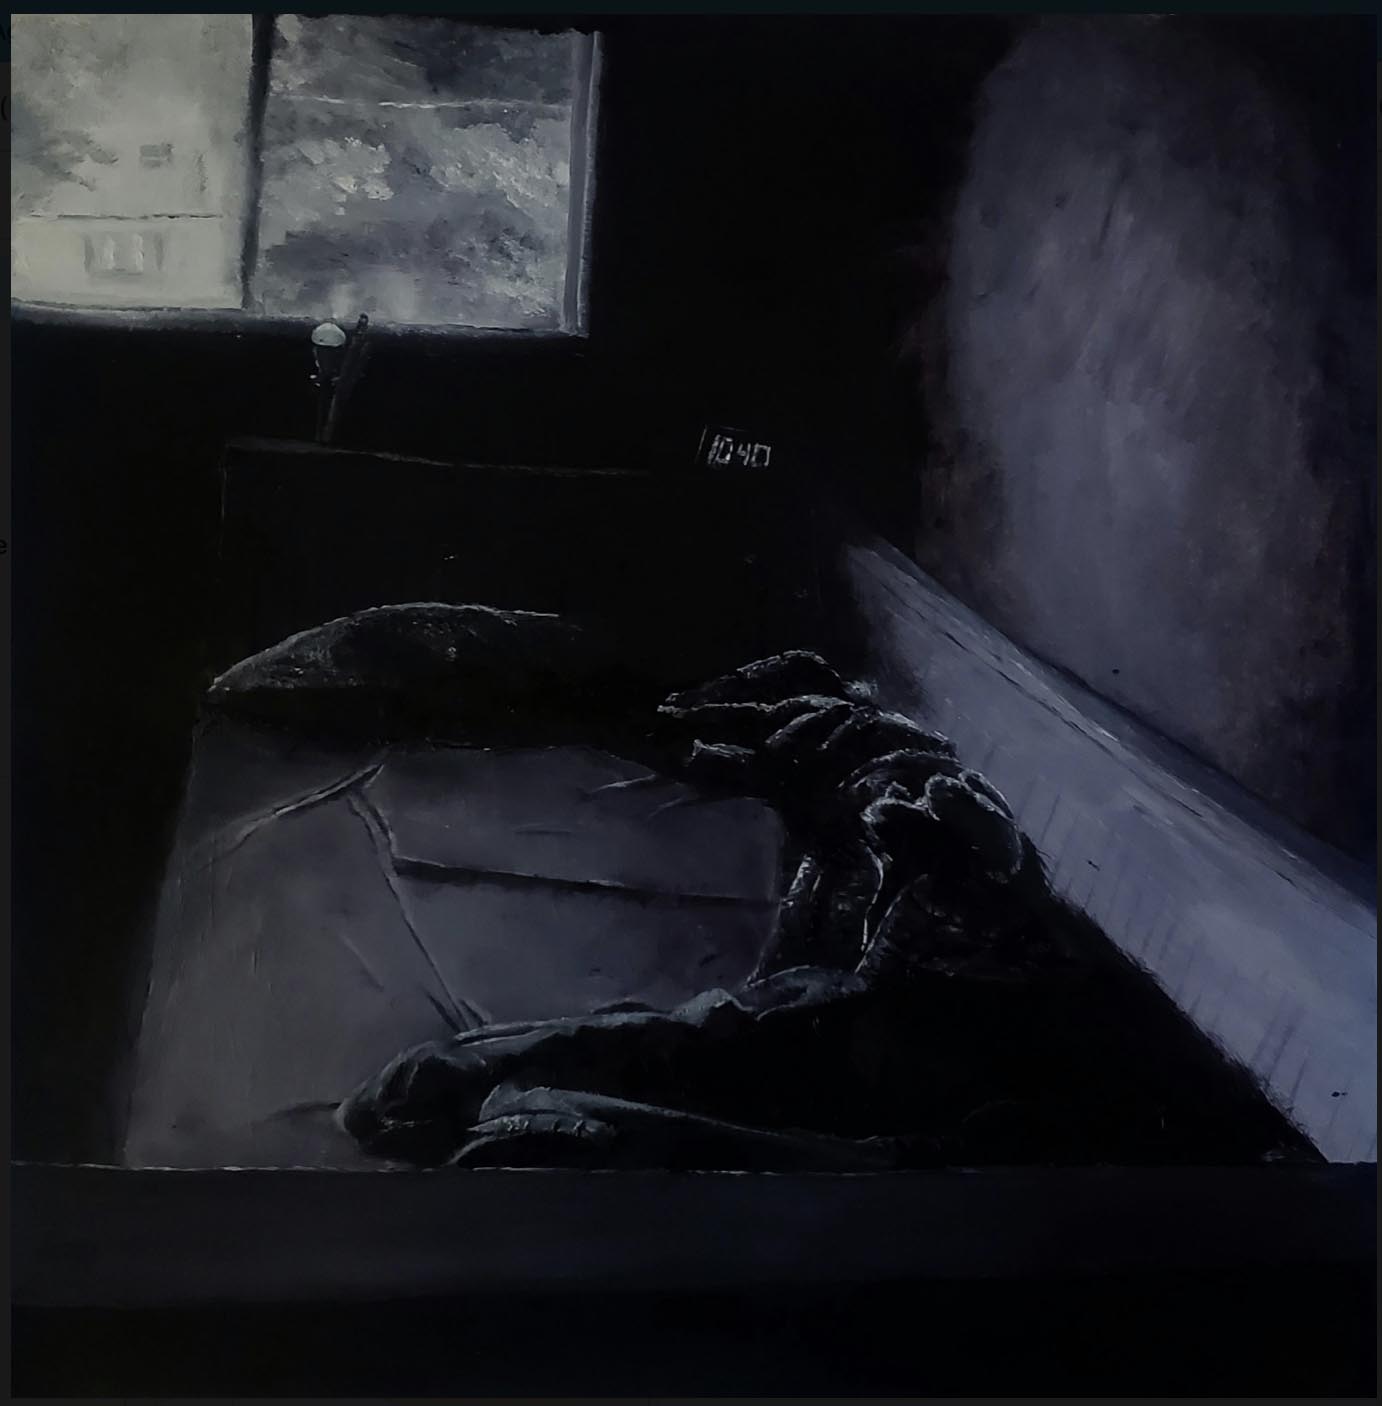 An open grey-toned window dimly illuminates a dark corner of a room; The window has a faint outline of a house and the outside world behind it. An unmade bed and an alarm clock reading 10:40 are the only things visible beside the room's walls. The scene feels freshly vacated and has an aura of haste.